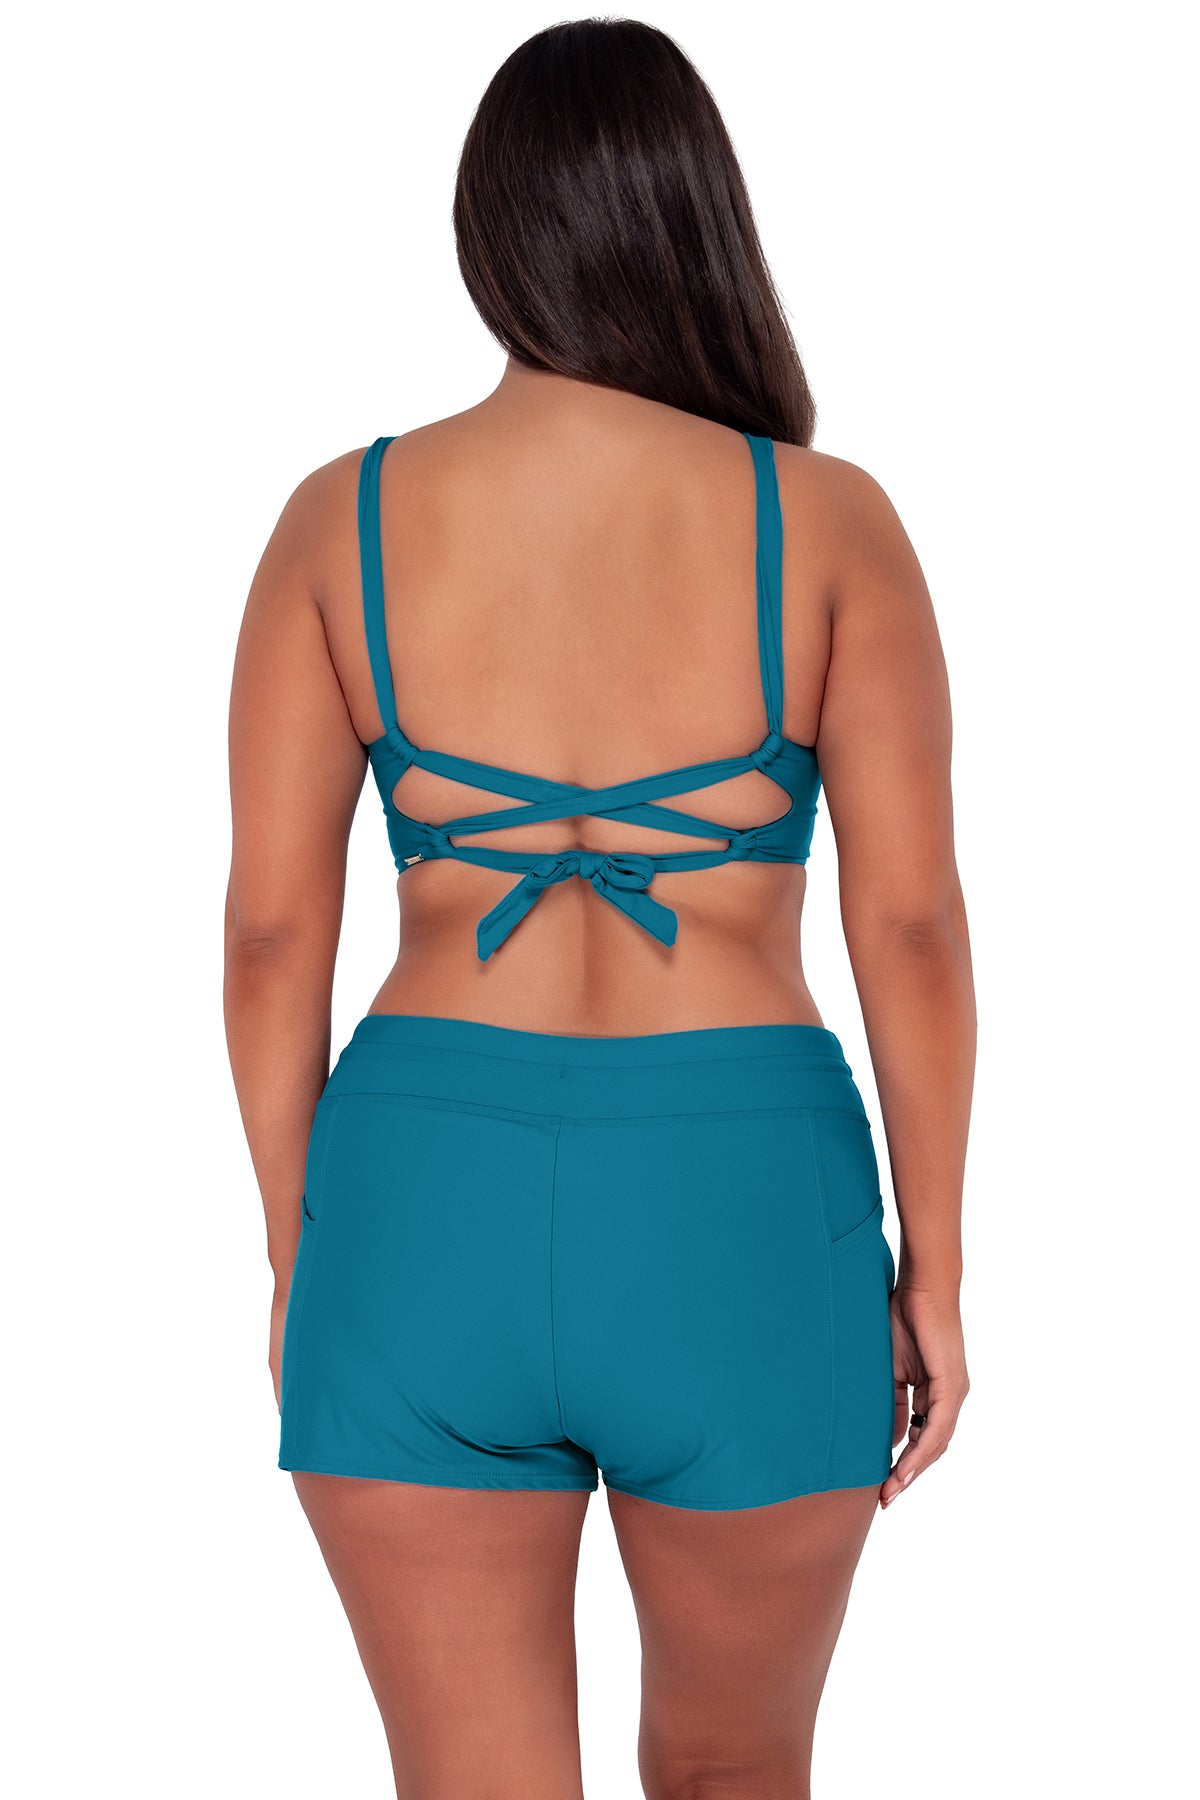 Back pose #1 of Nicki wearing Sunsets Avalon Teal Elsie Top paired with Laguna Swim Short women's casual wear